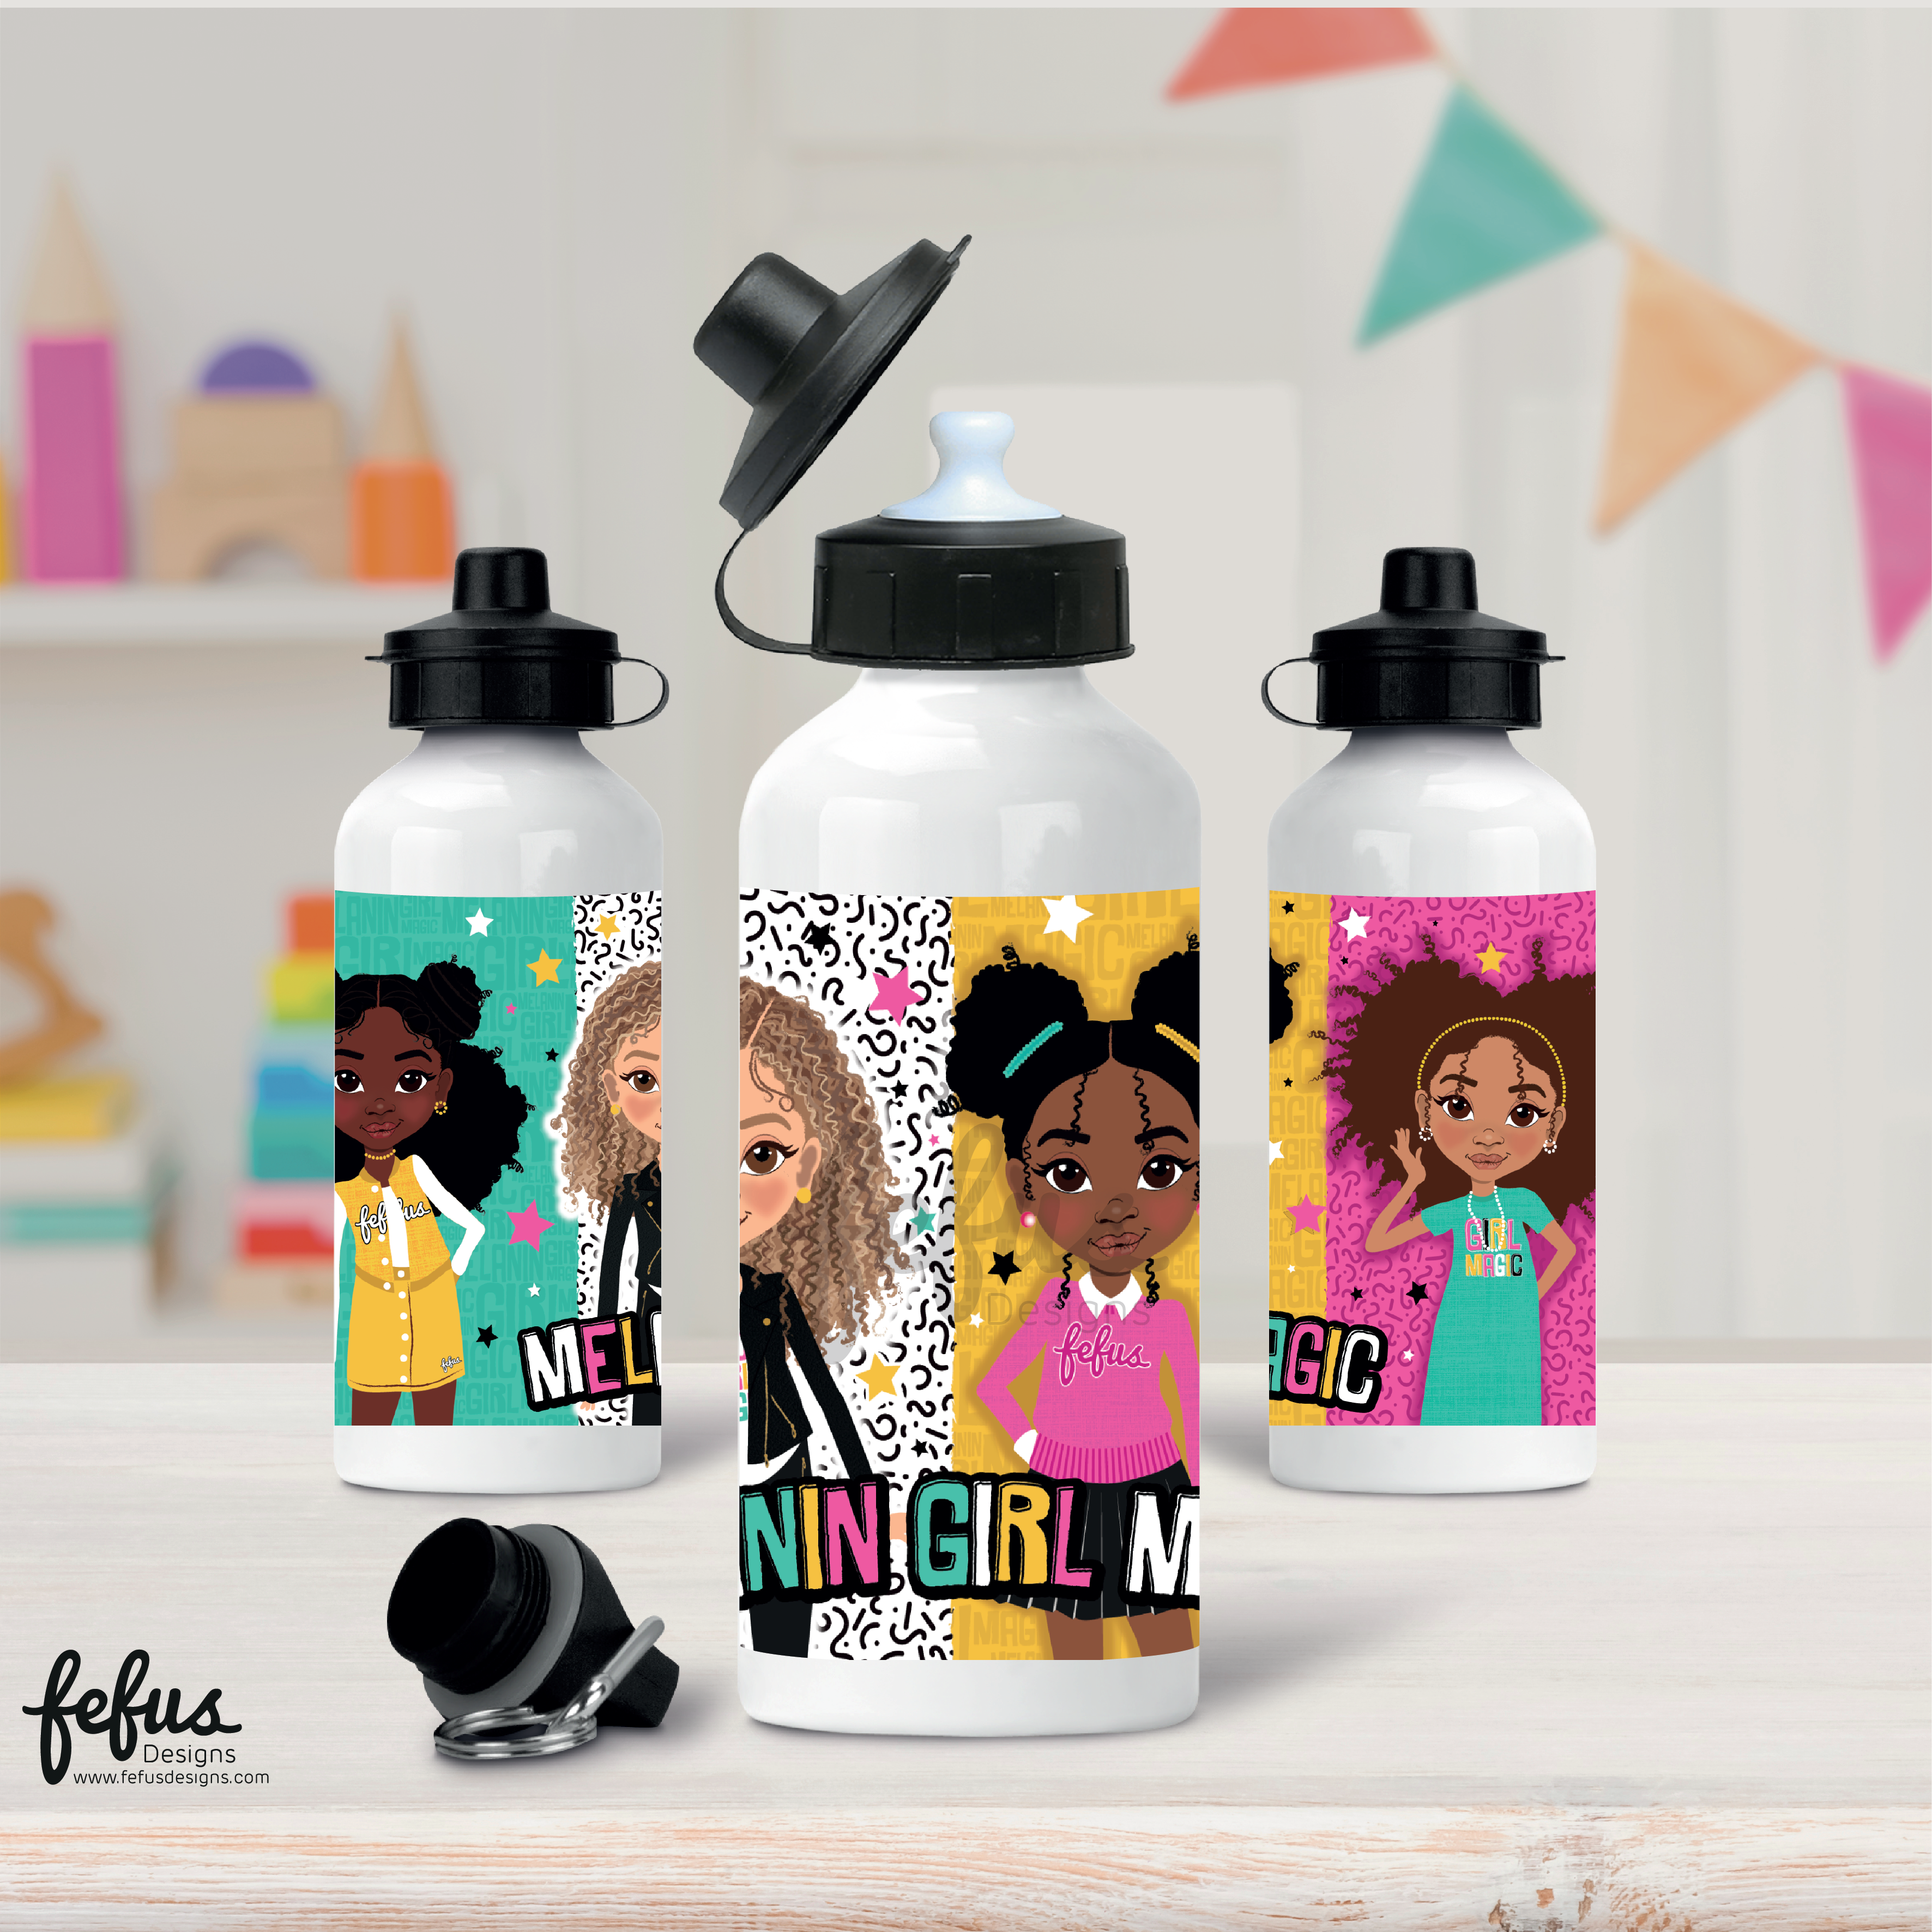 A striking Melanin Girl Magic Aluminium Water Bottle by Fefus Designs. This lightweight and durable water bottle empowers young queens, featuring a design with four brown beauties and the phrase 'Melanin Girl Magic'. With a 500ml capacity, it ensures hydration throughout the day, while the aluminium construction keeps drinks cool. Perfect for school, sports, and outdoor adventures. Surprise a special young queen with this empowering gift, celebrating her uniqueness and magical impact on the world